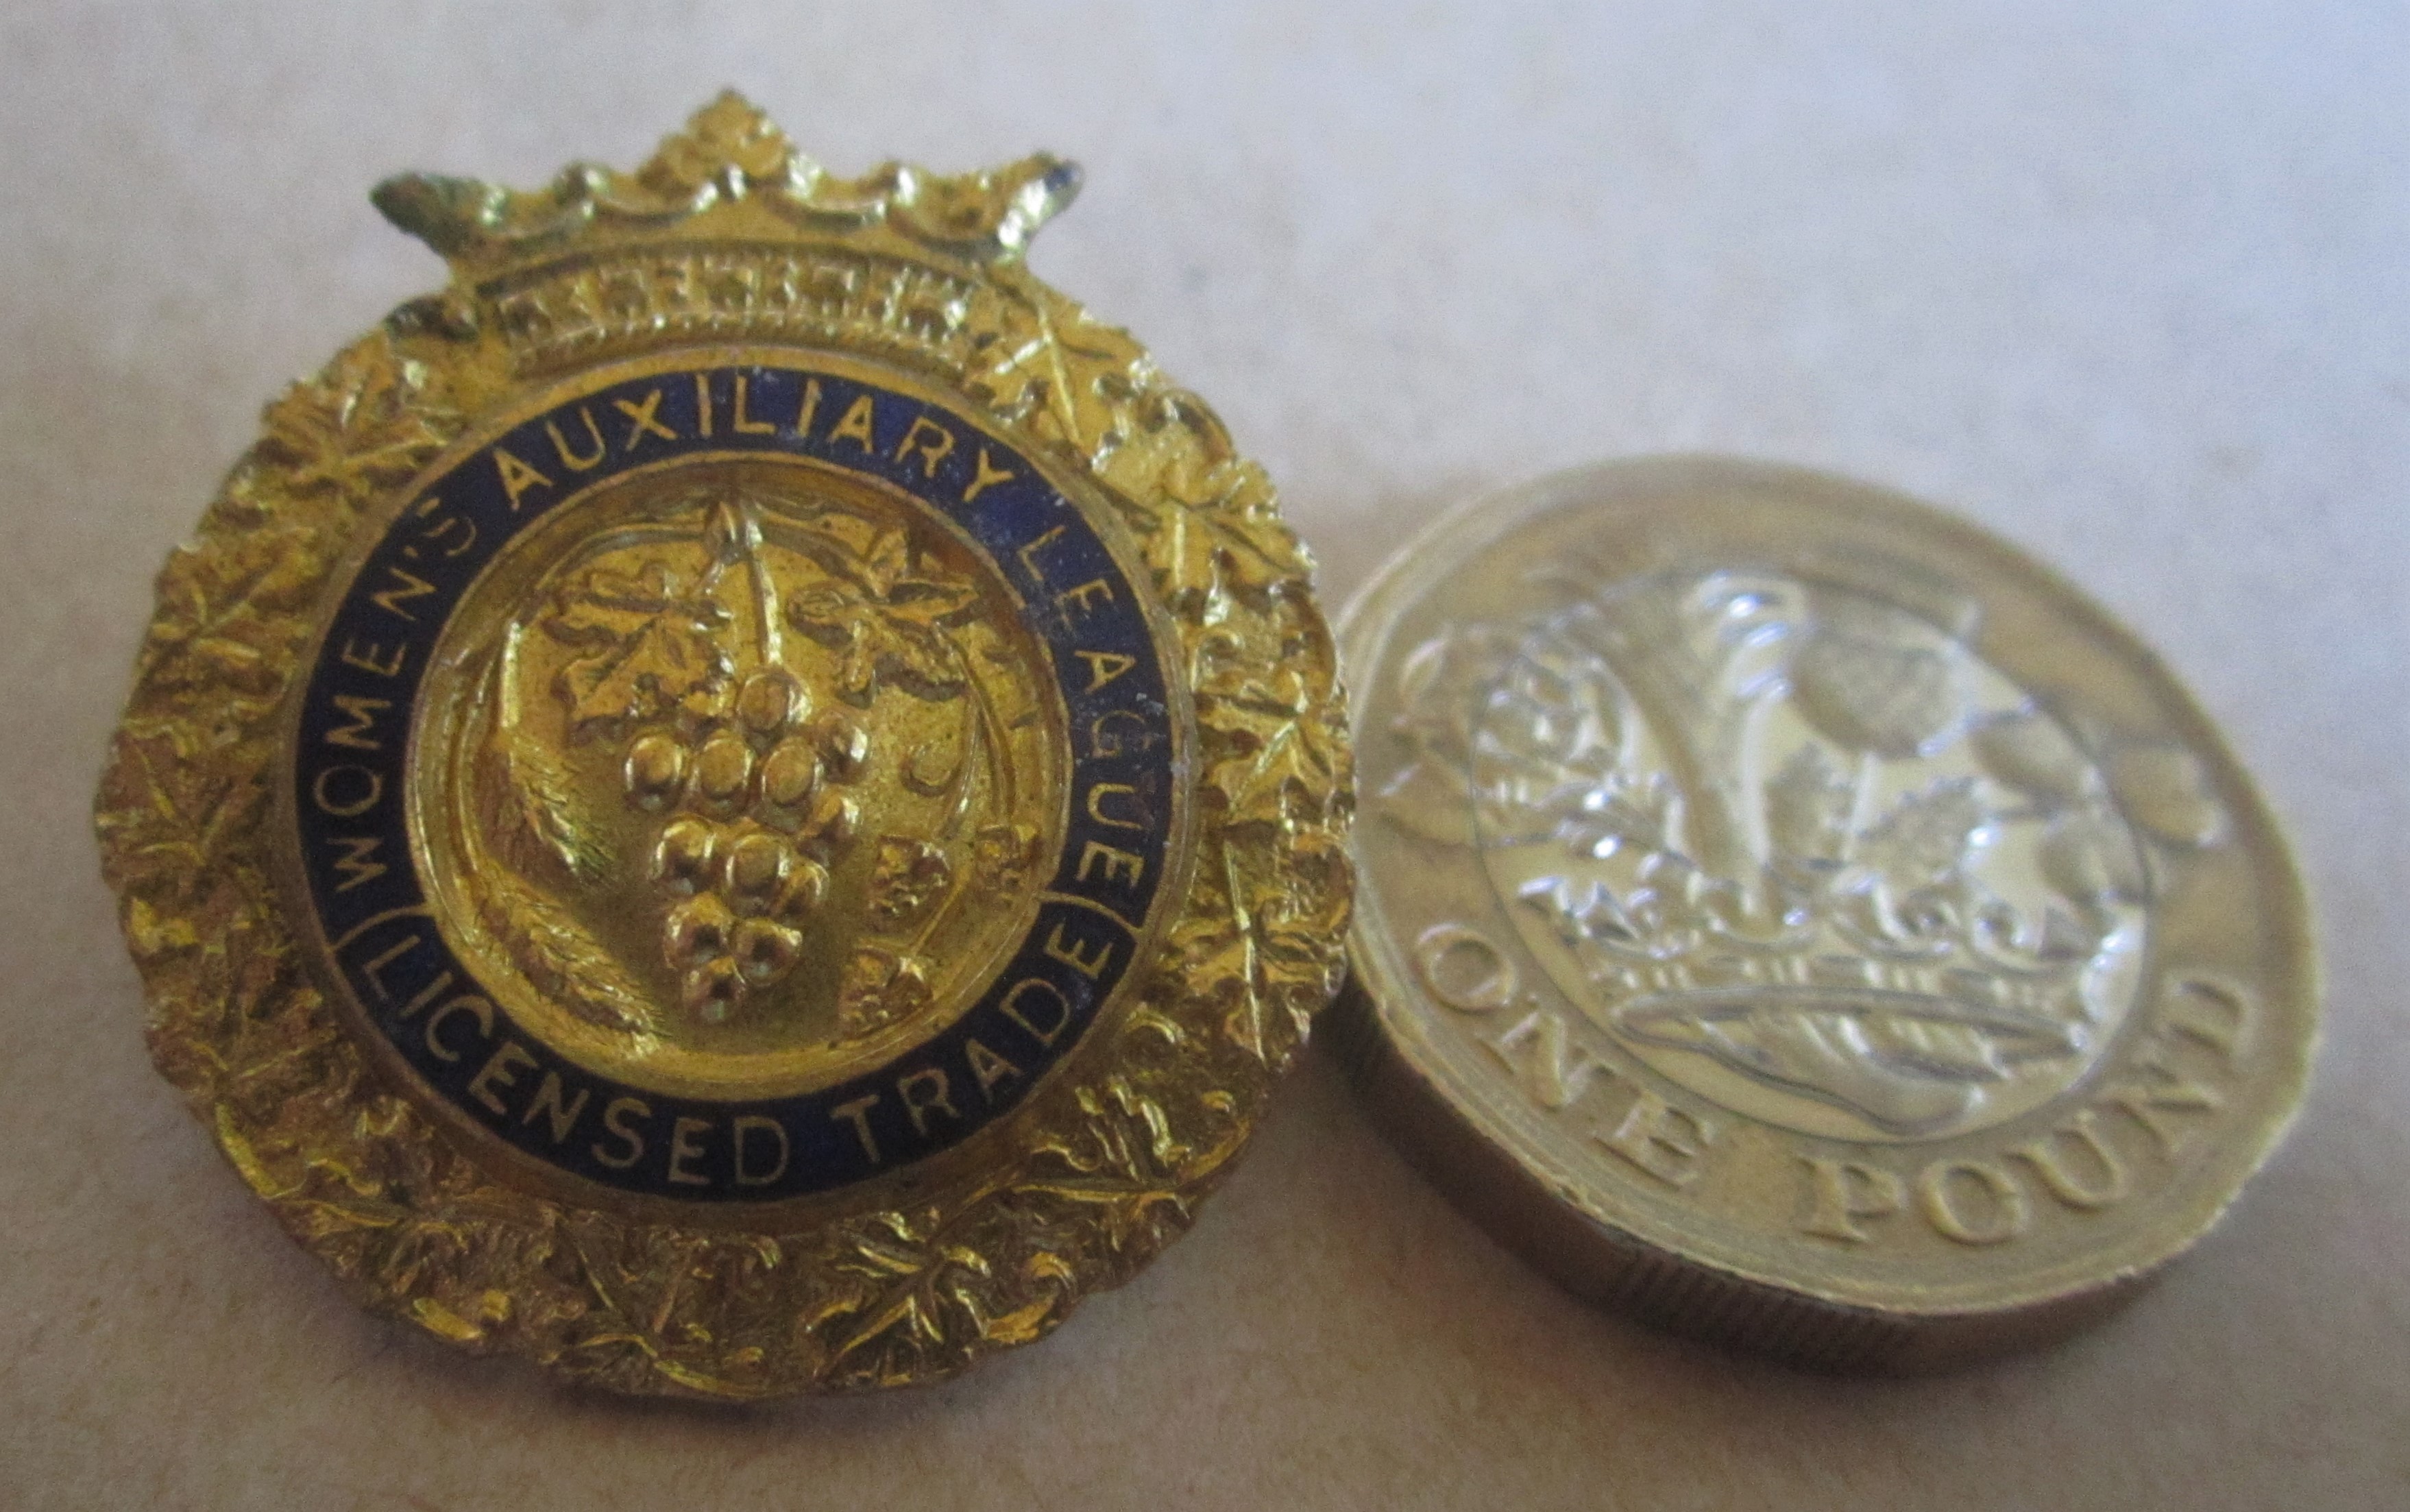 BADGE - VINTAGE WOMEN'S AUXILIARY LEAGUE (LICENSED TRADE